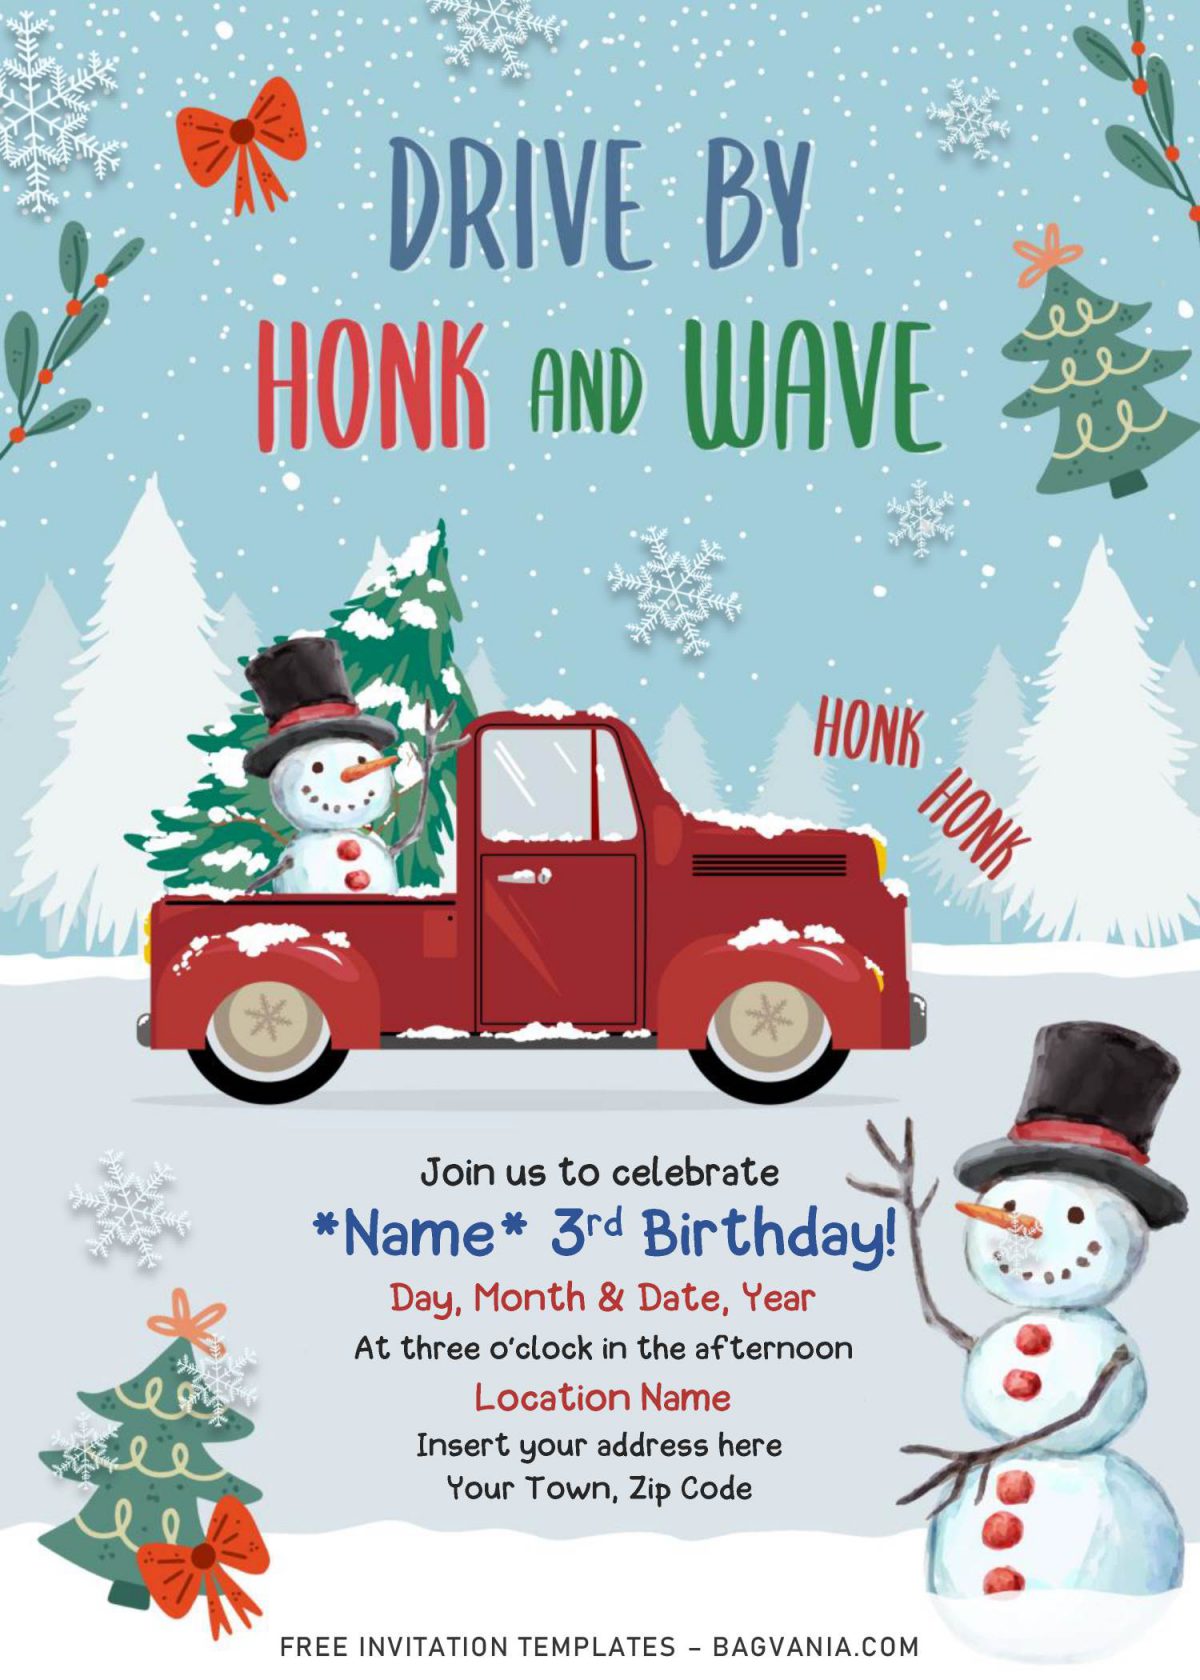 Free Winter Red Truck Drive By Birthday Party Invitation Templates For Word and has snow in the forest